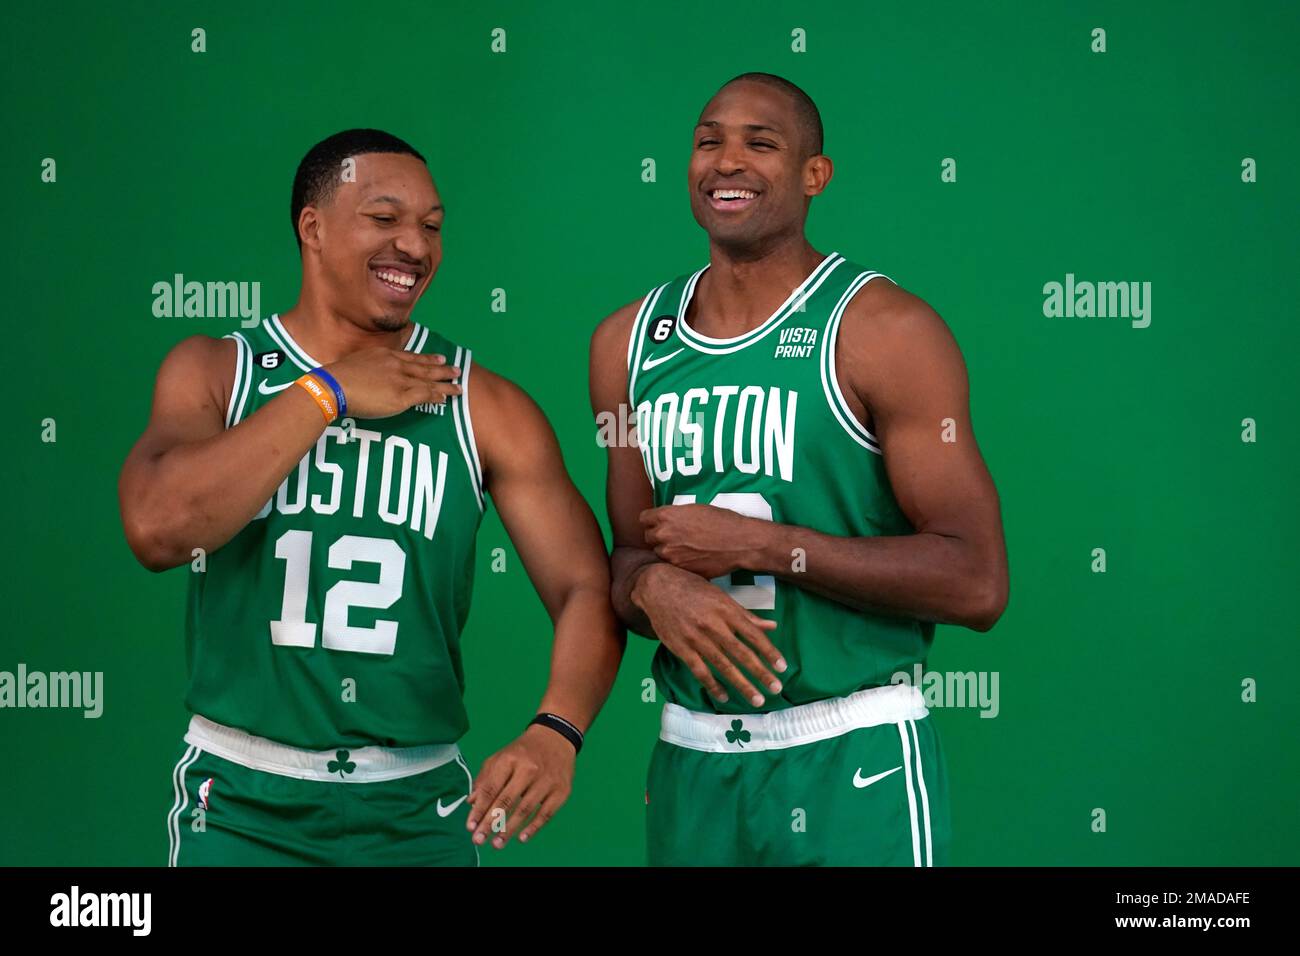 Boston Celtics forward Grant Williams, left, jokes with center Al Horford, right, as the basketball players stand for photos during Boston Celtics Media Day, Monday, Sept. 26, 2022, in Canton, Mass. (AP Photo/Steven Senne) Stock Photo